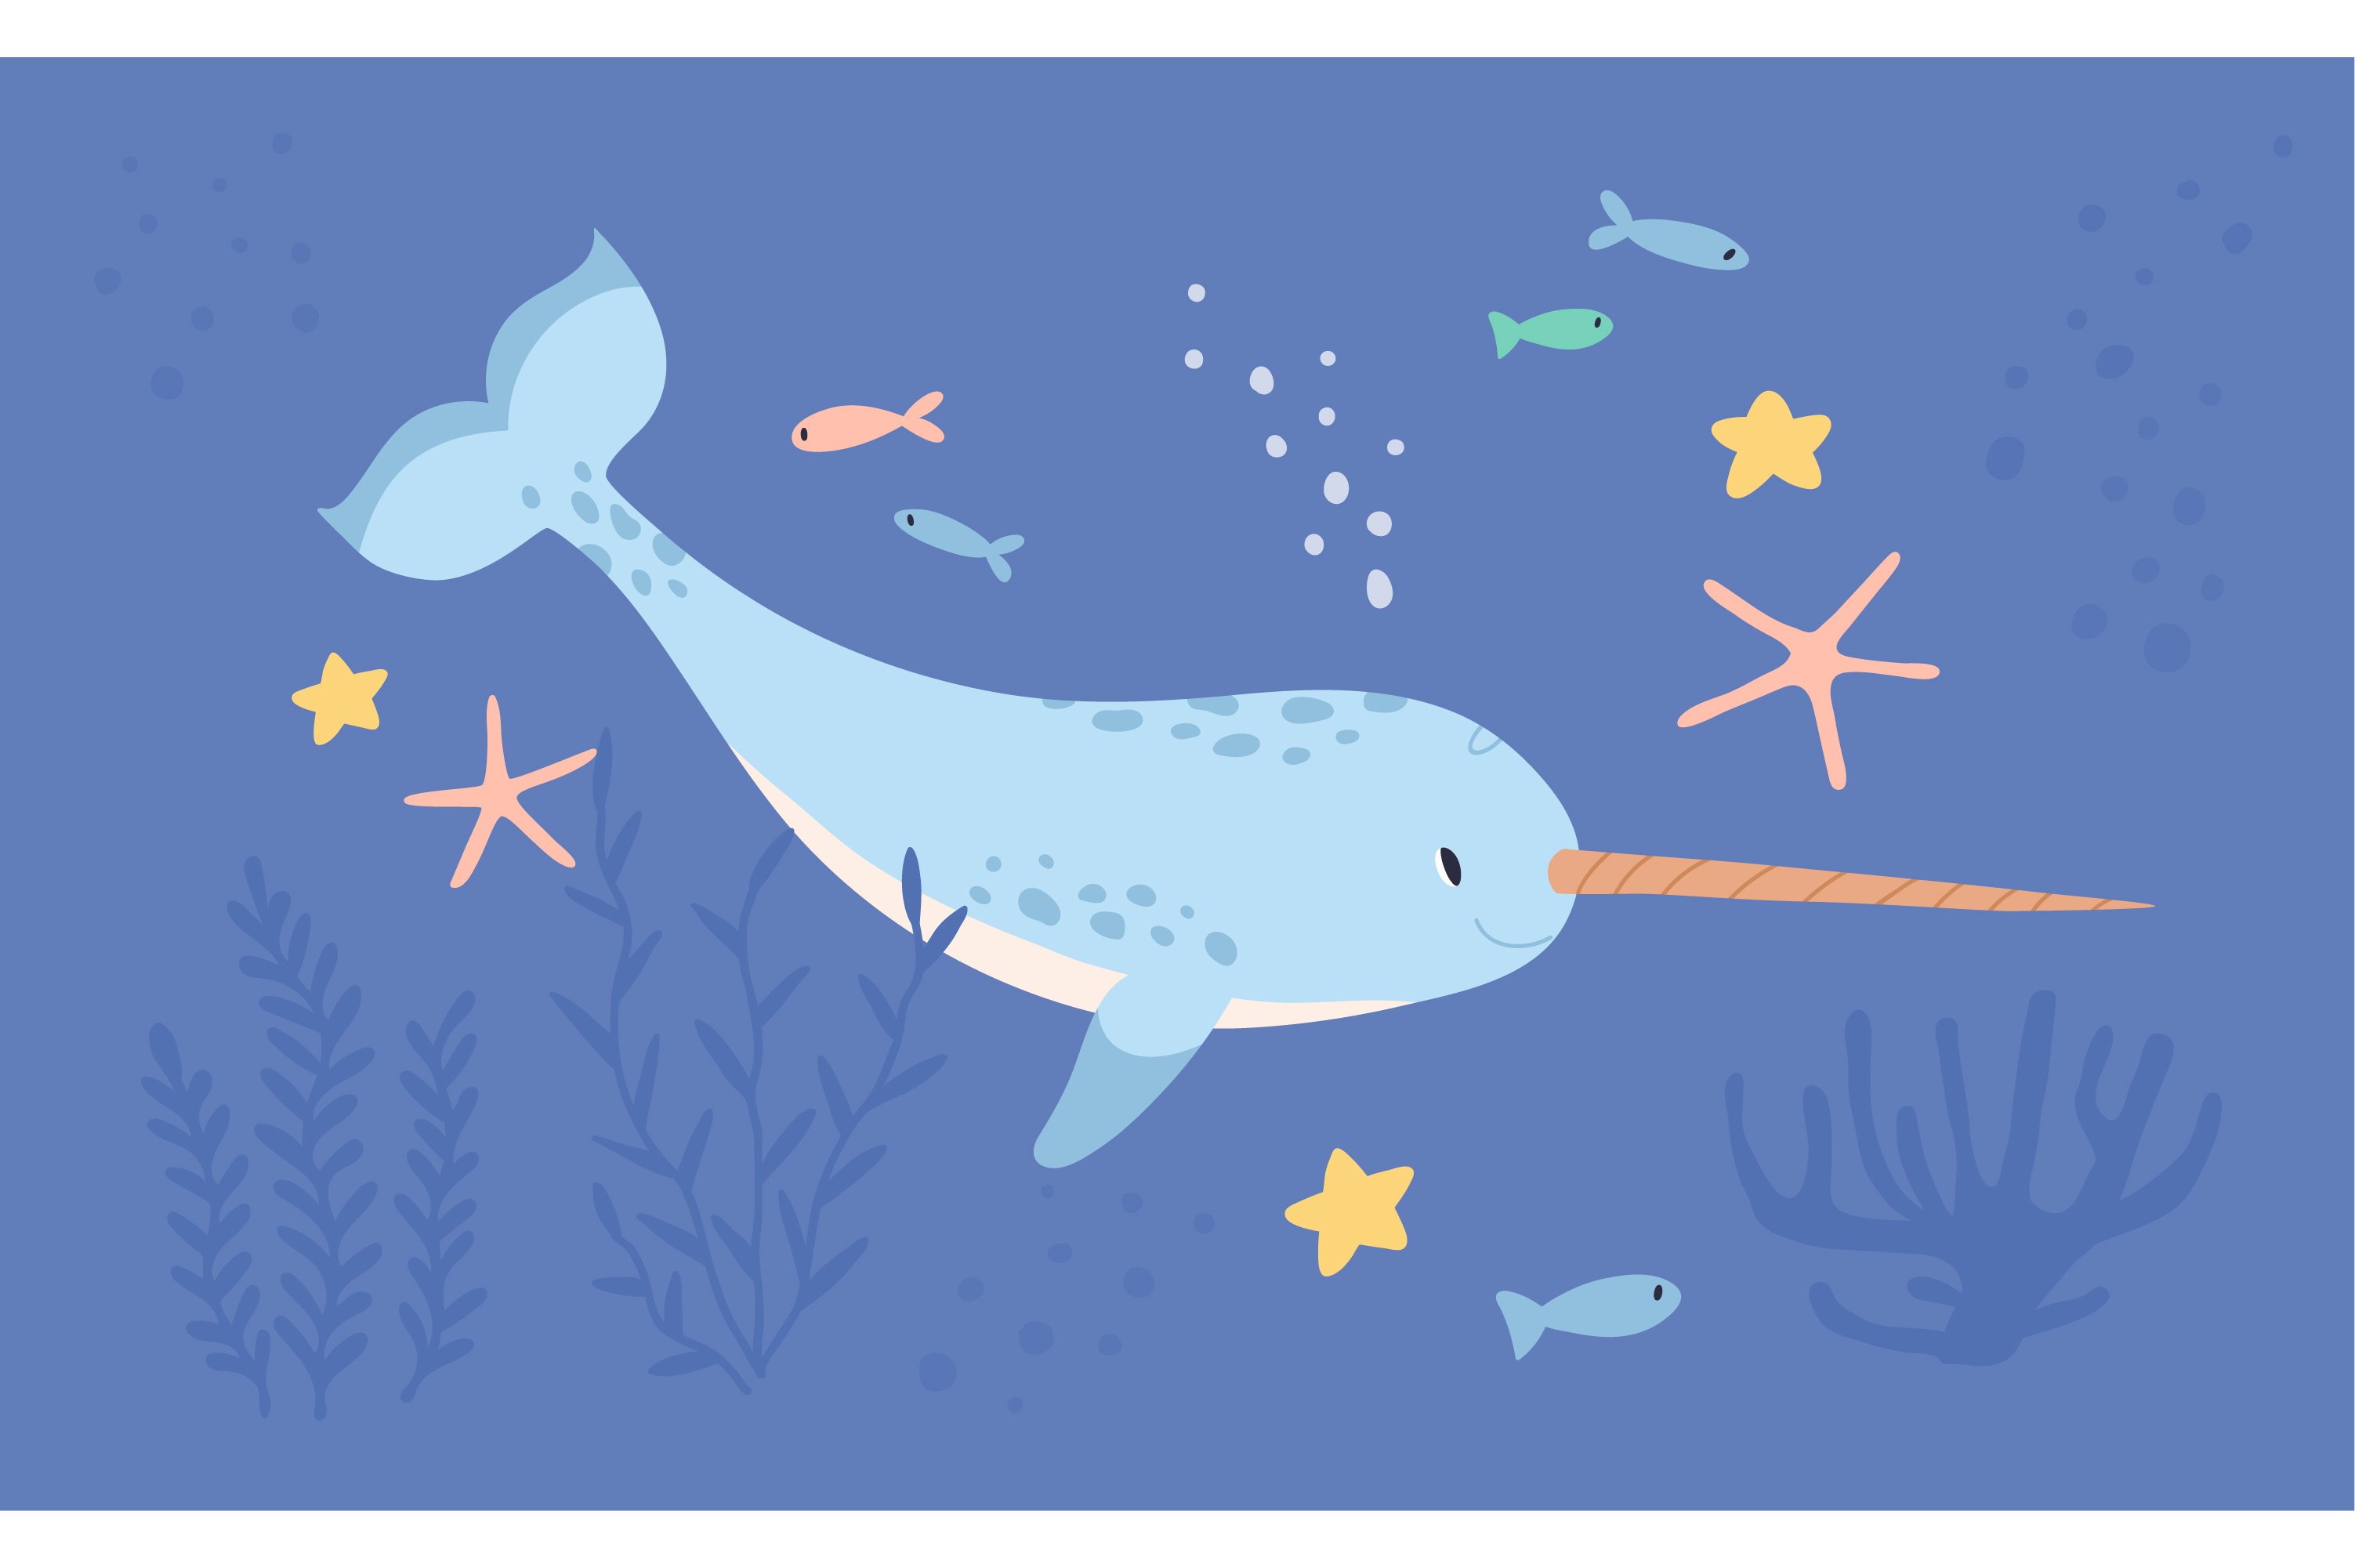 Cute narwhal or unicorn fish cover image.